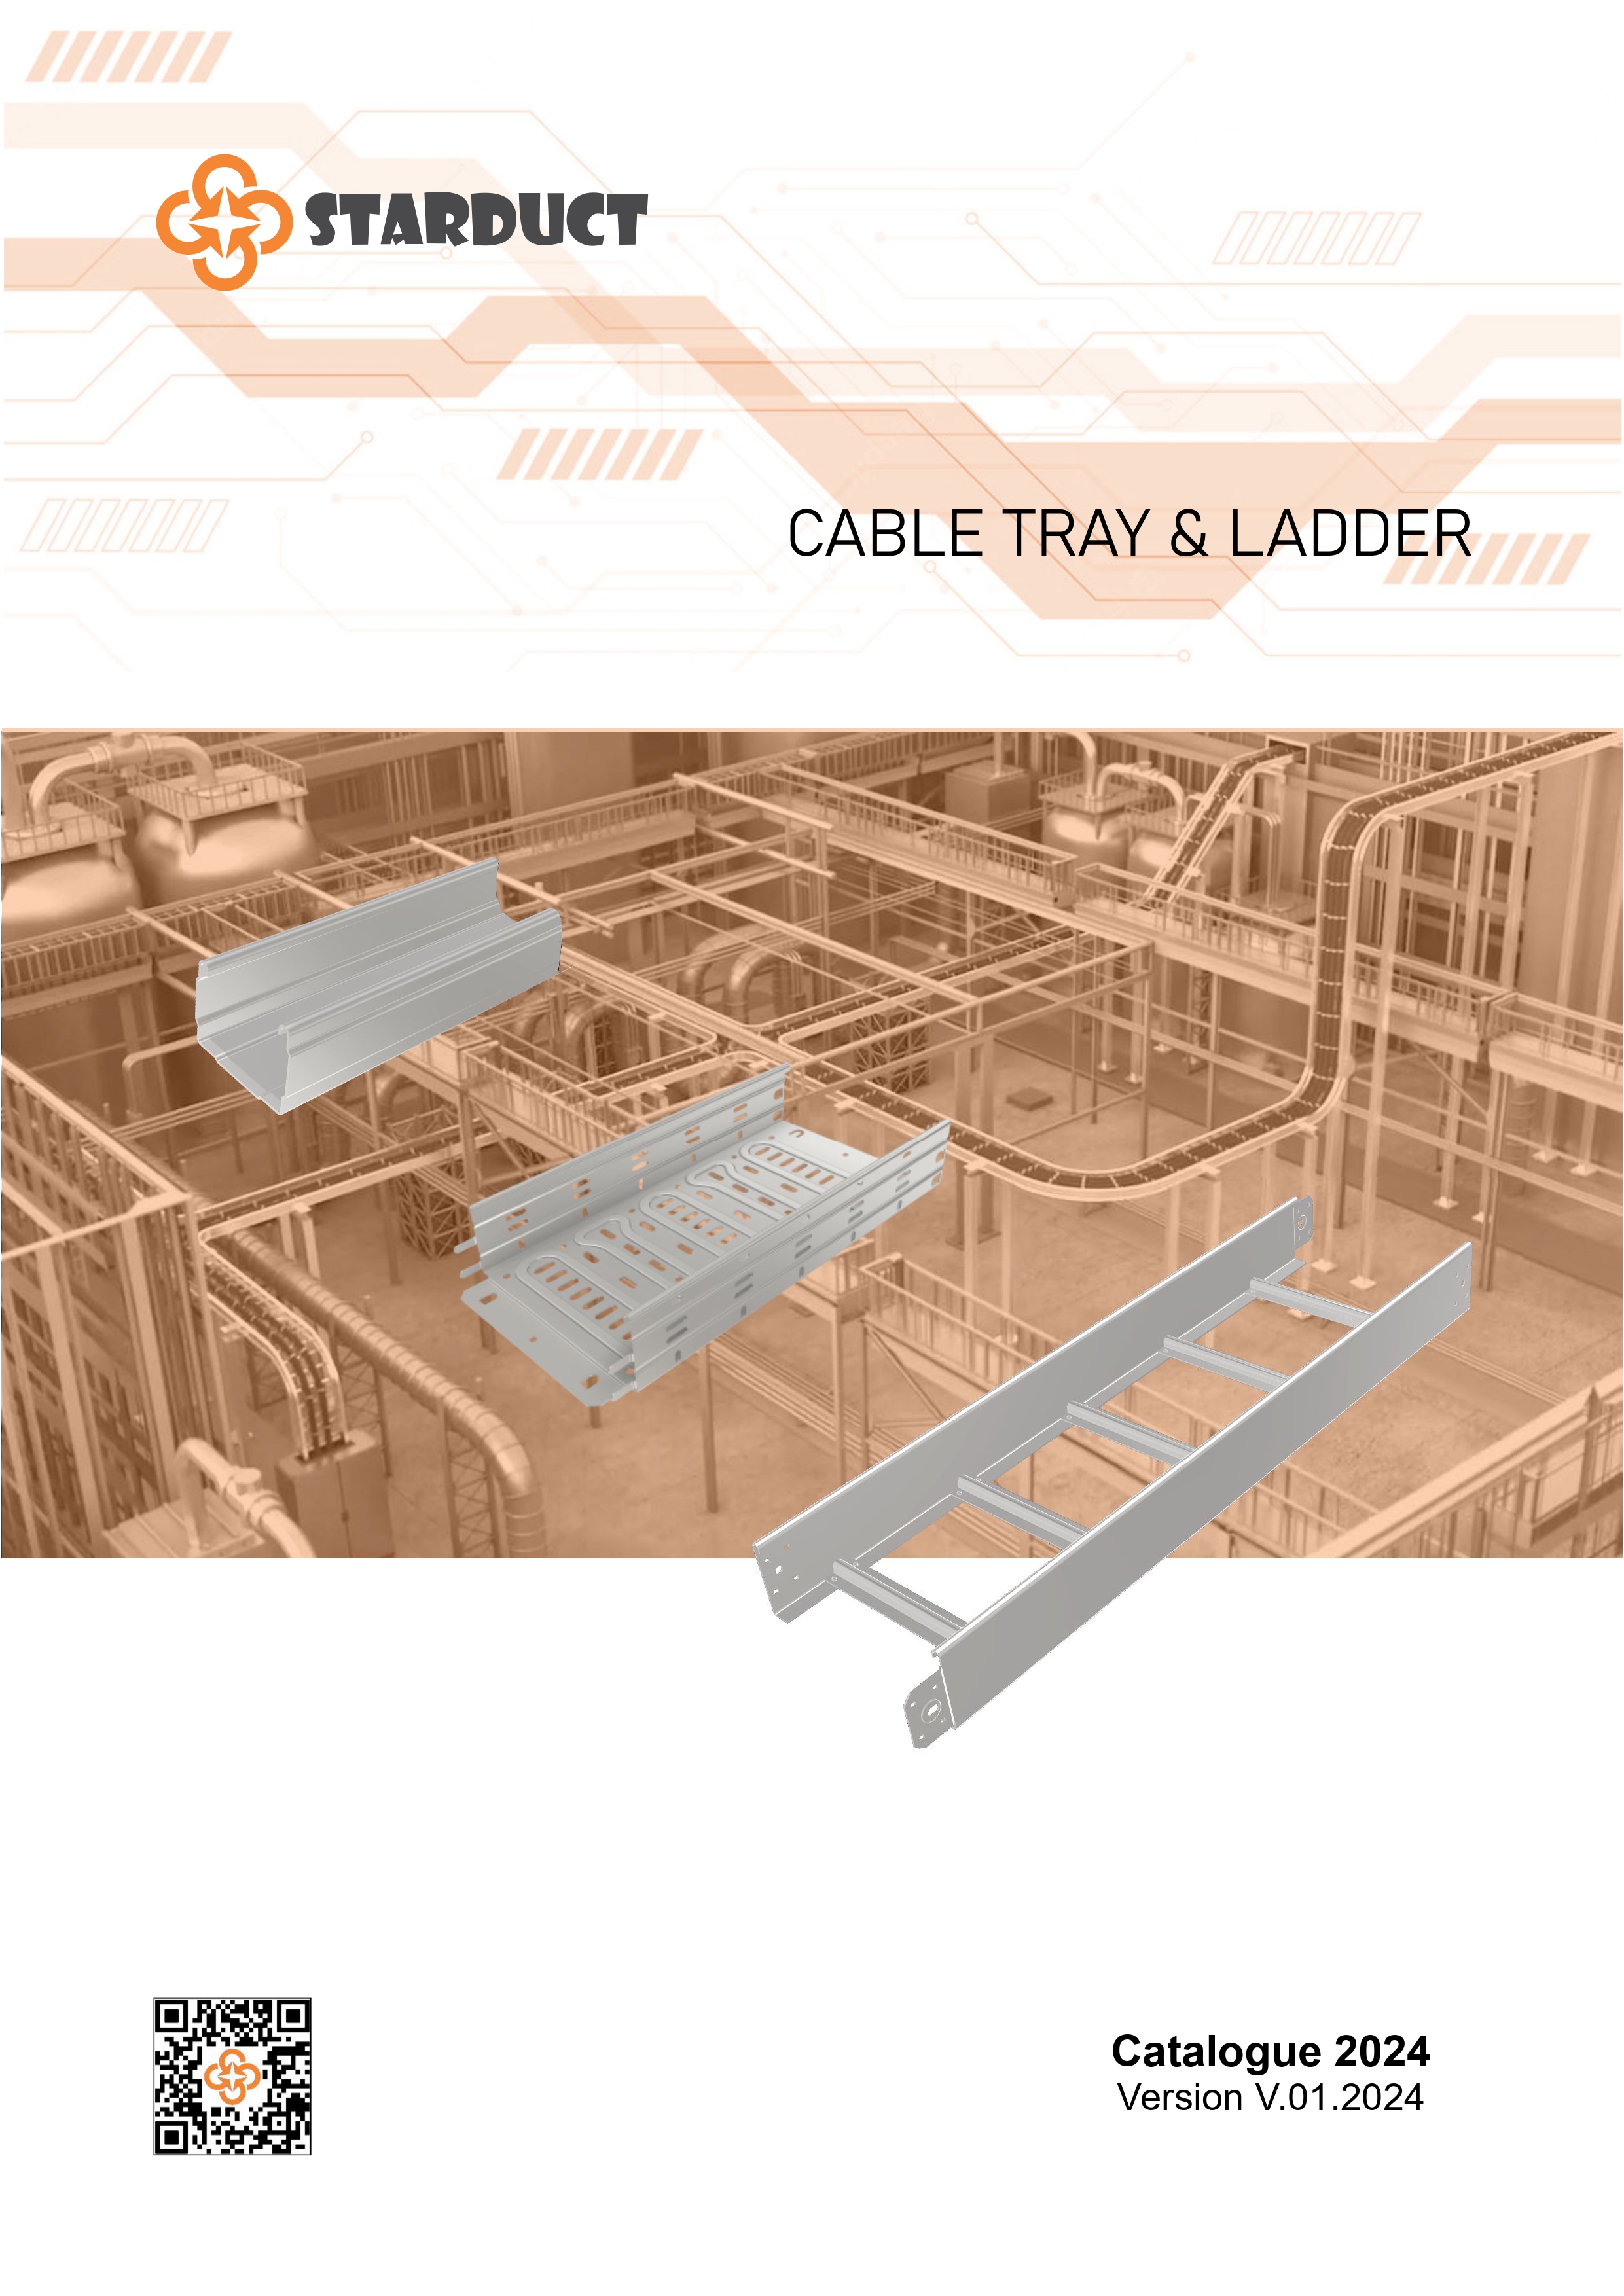 CATALOGUE CABLE TRAY & LADDER